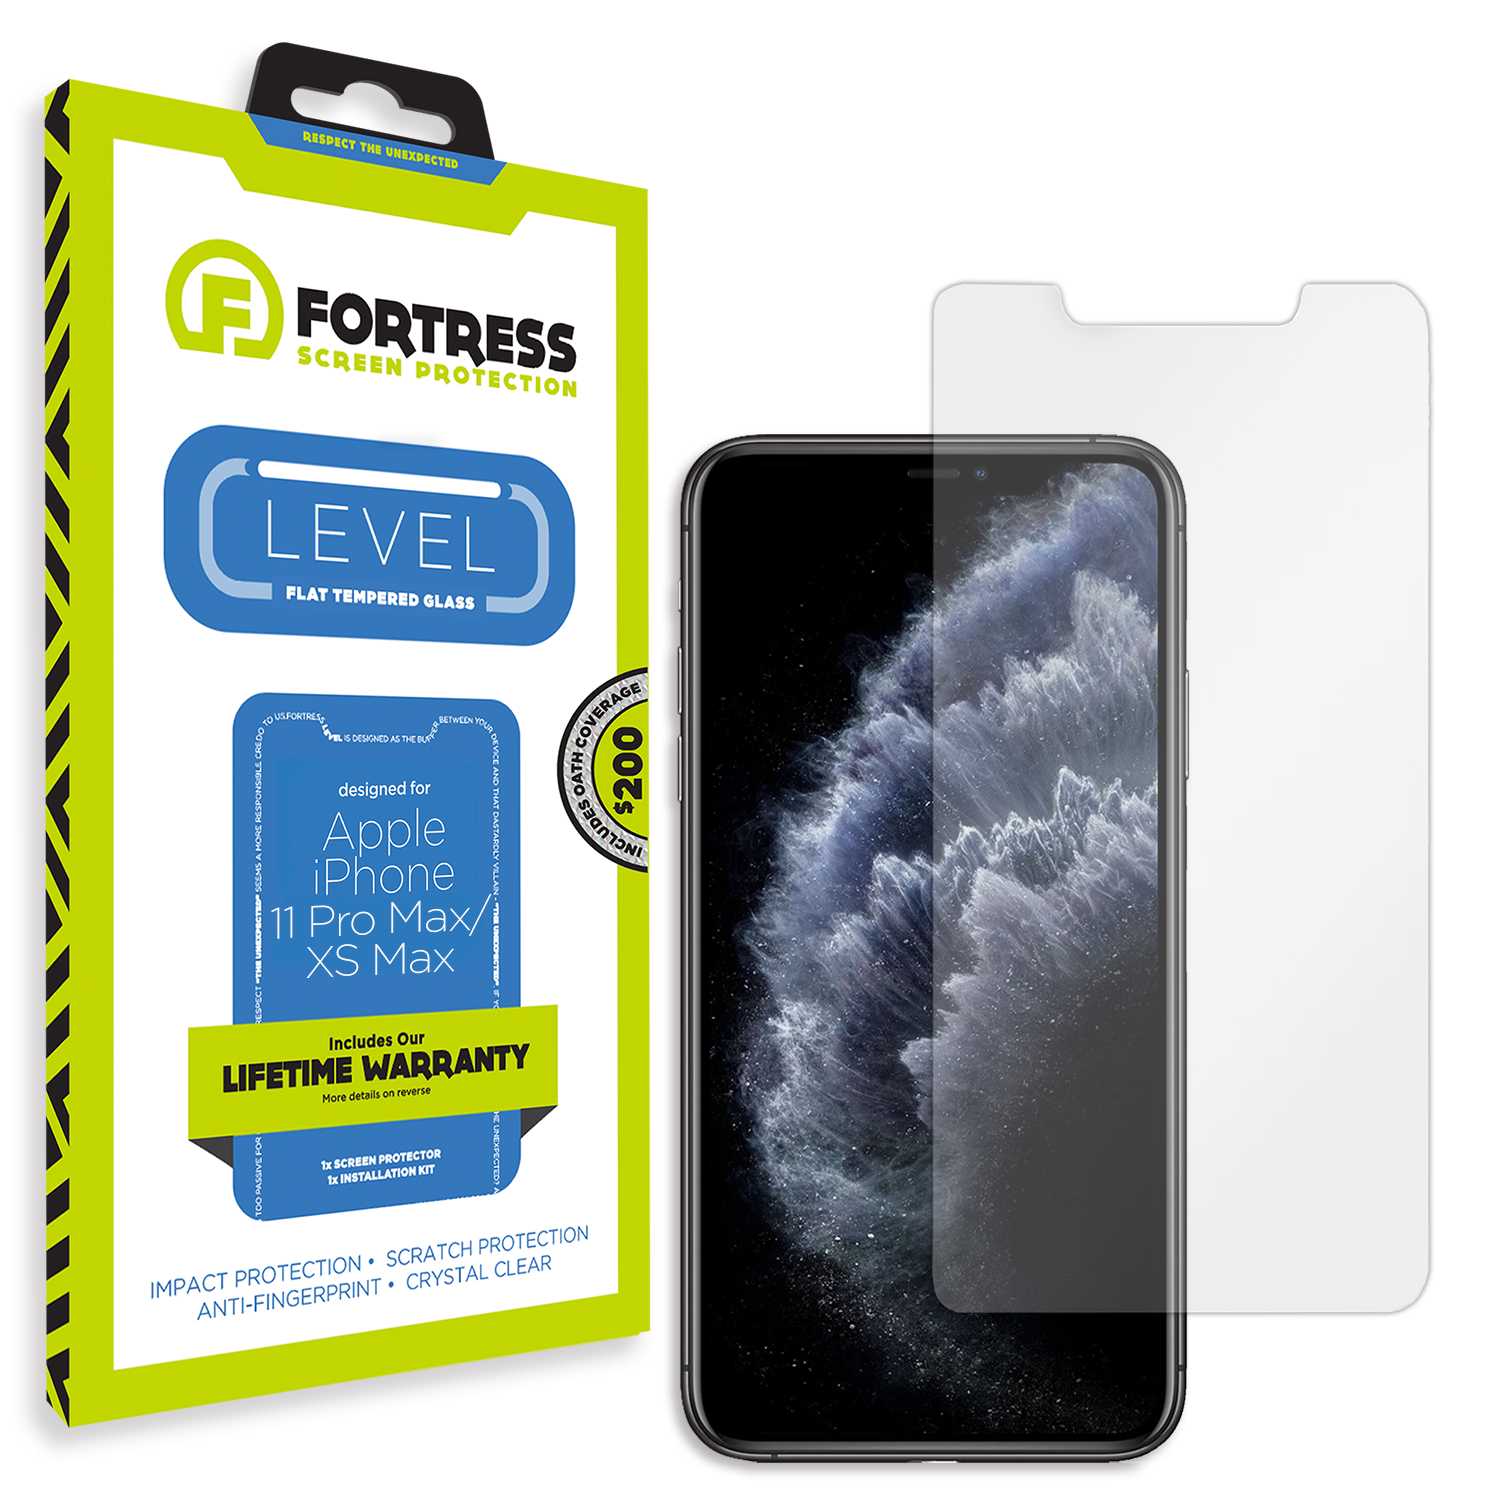 Fortress iPhone 11 Pro Max Screen Protector $200Coverage Scooch Screen Protector